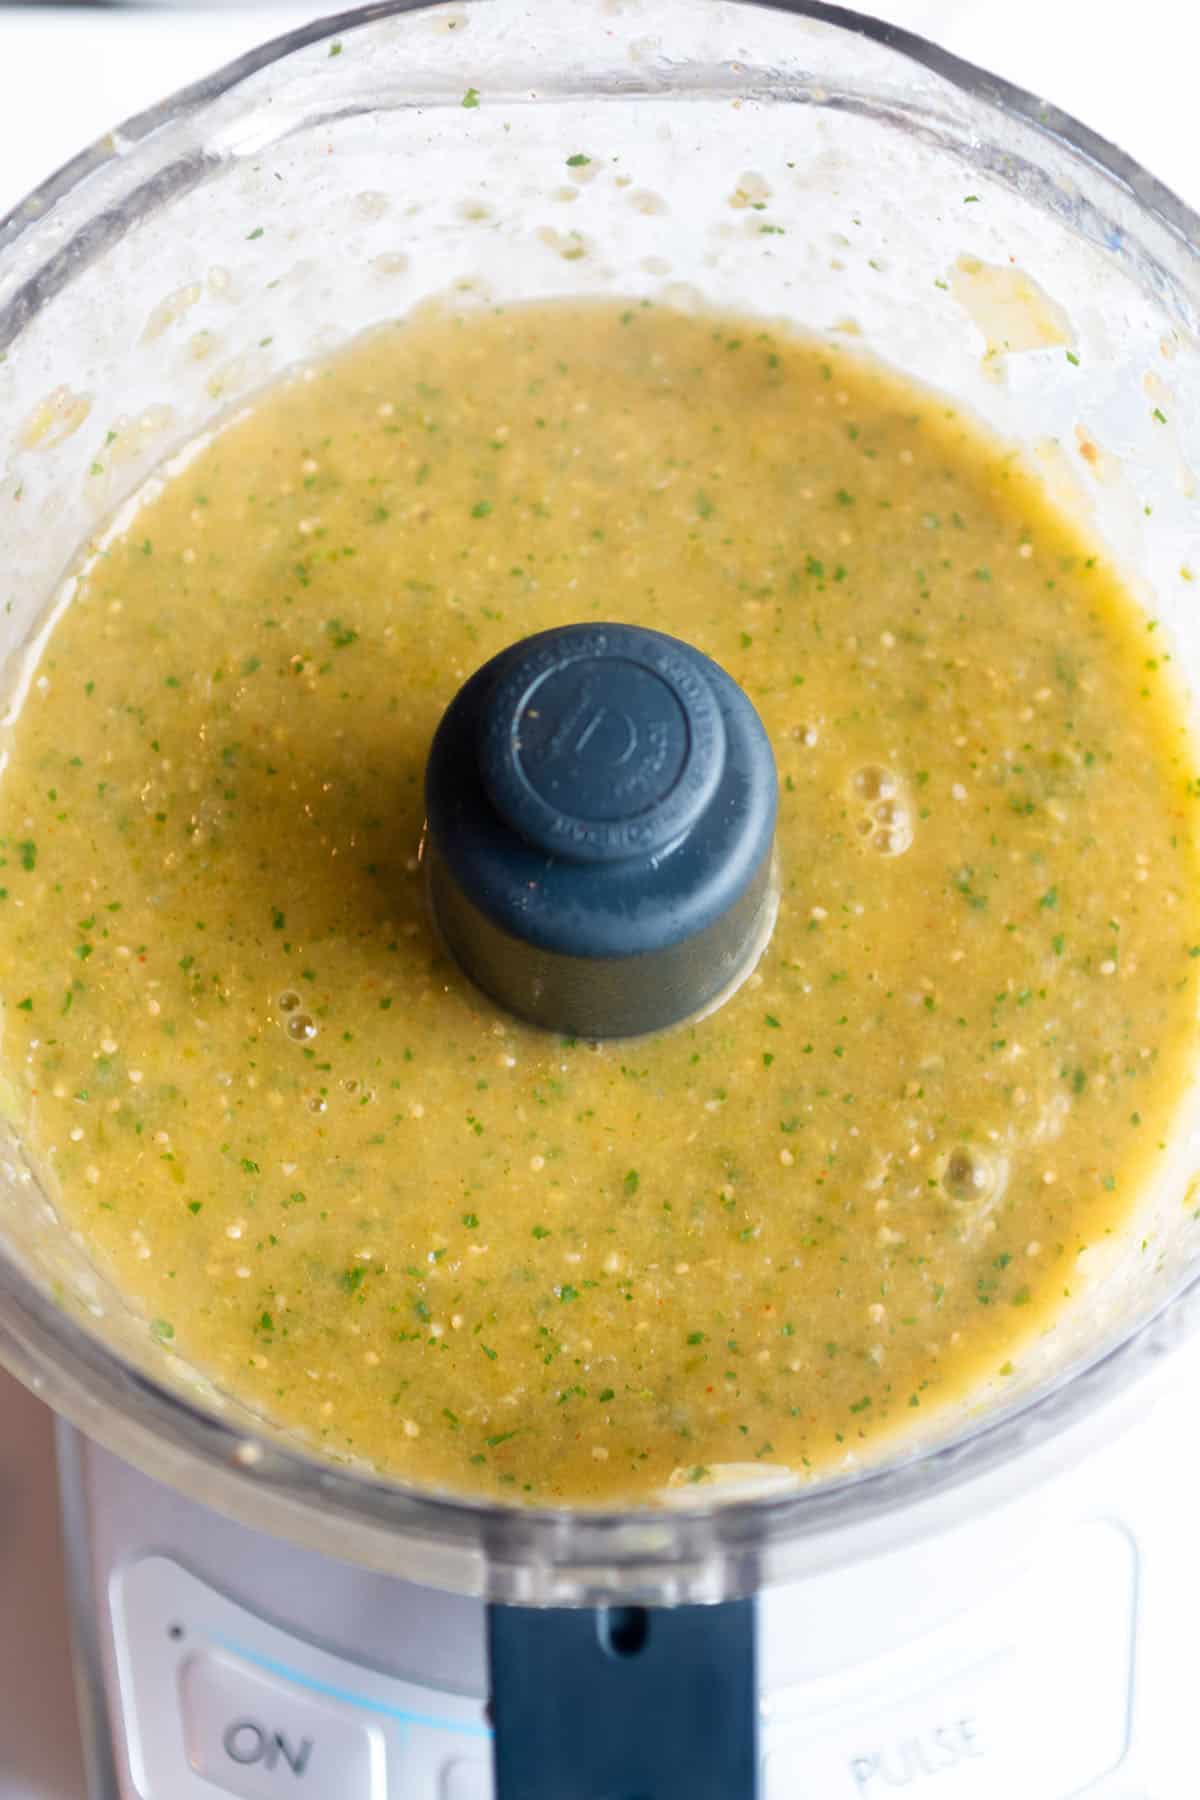 Food processor with a pureed tomatillo green salsa.